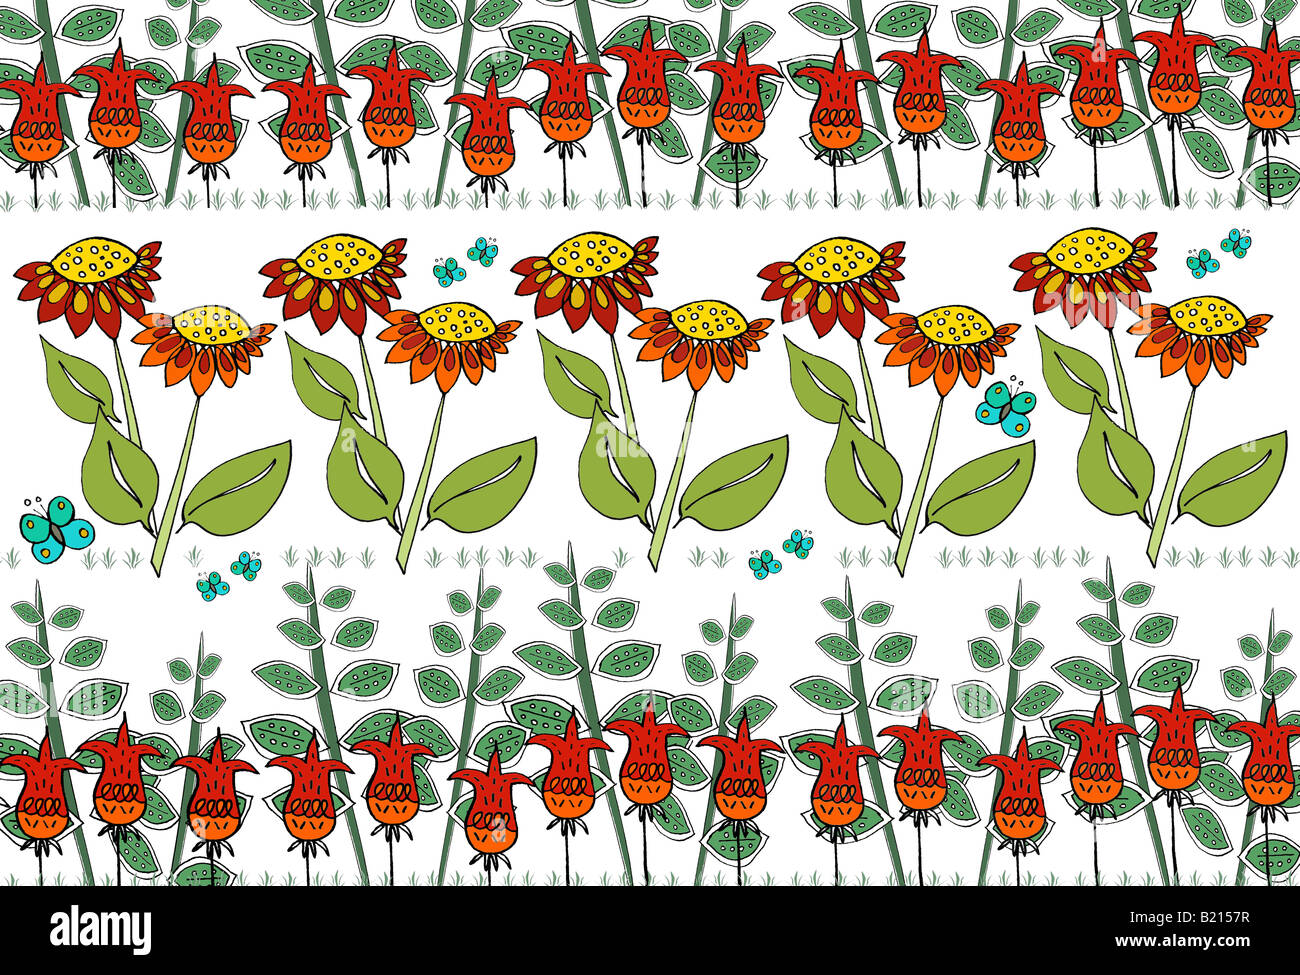 Graphic patter/illustration of 1950's style flowers against a white background Stock Photo